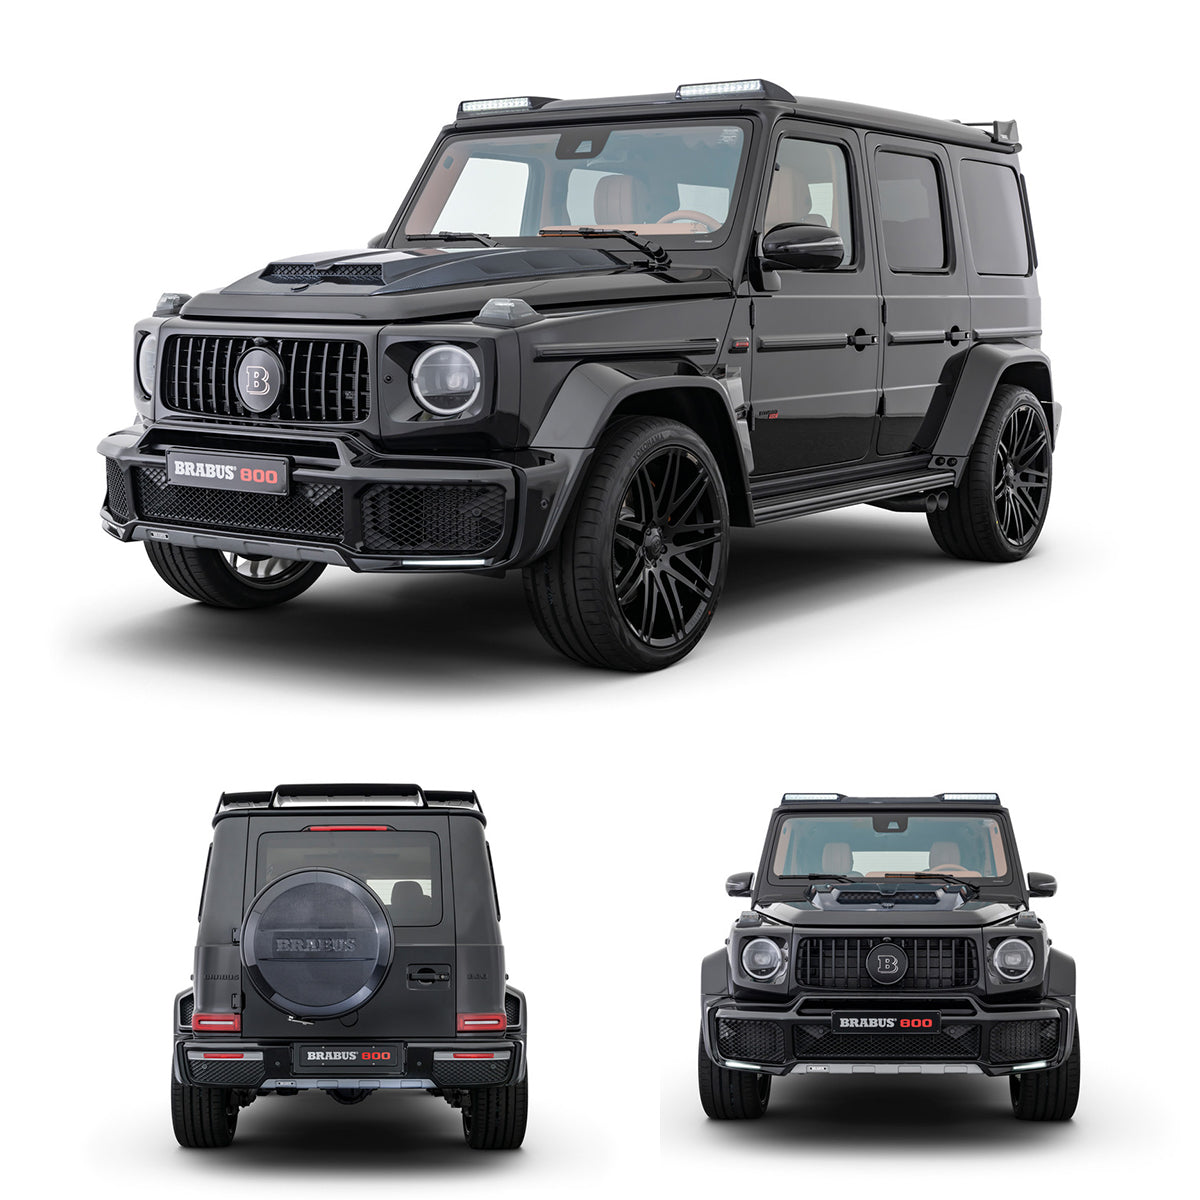 BODY KIT FOR W464 G-CLASS UPGRADE TO BRABUS STYLE